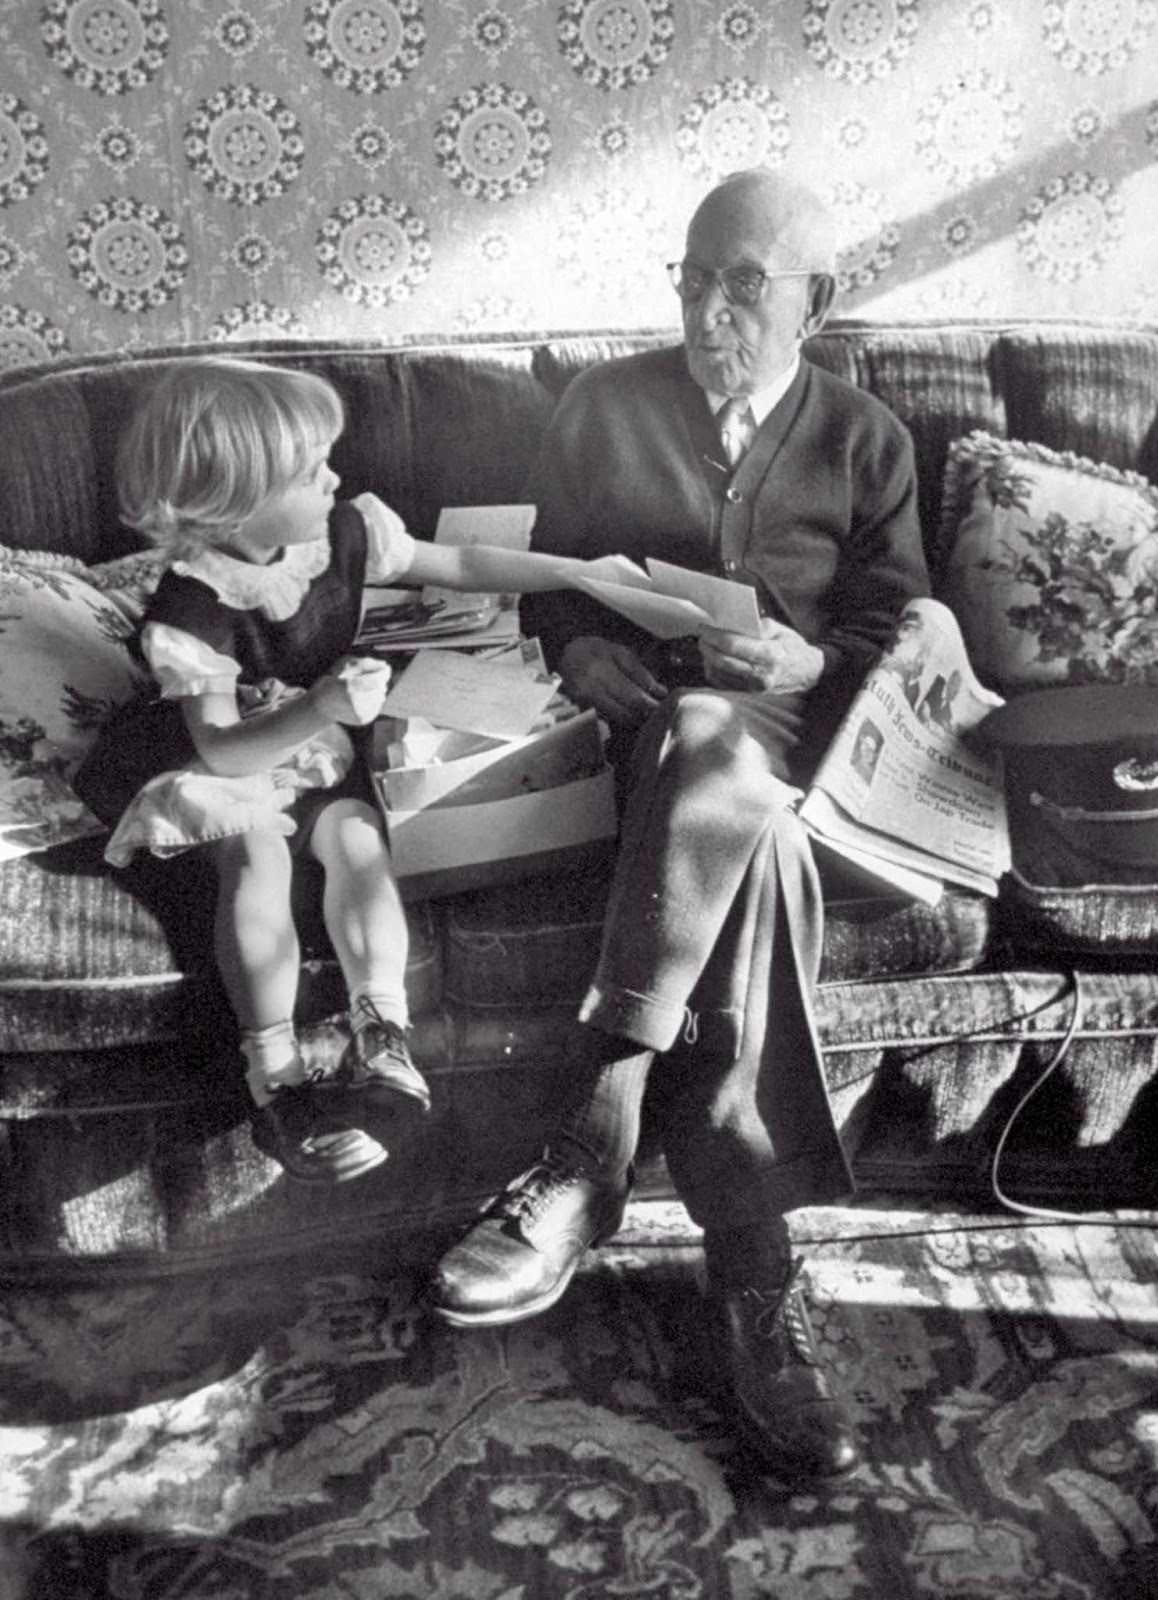 107 years old last remaining GAR Civil War Veteran Albert Woolson, relaxing on the couch while a little girl helps him sort through some mail. 1954.